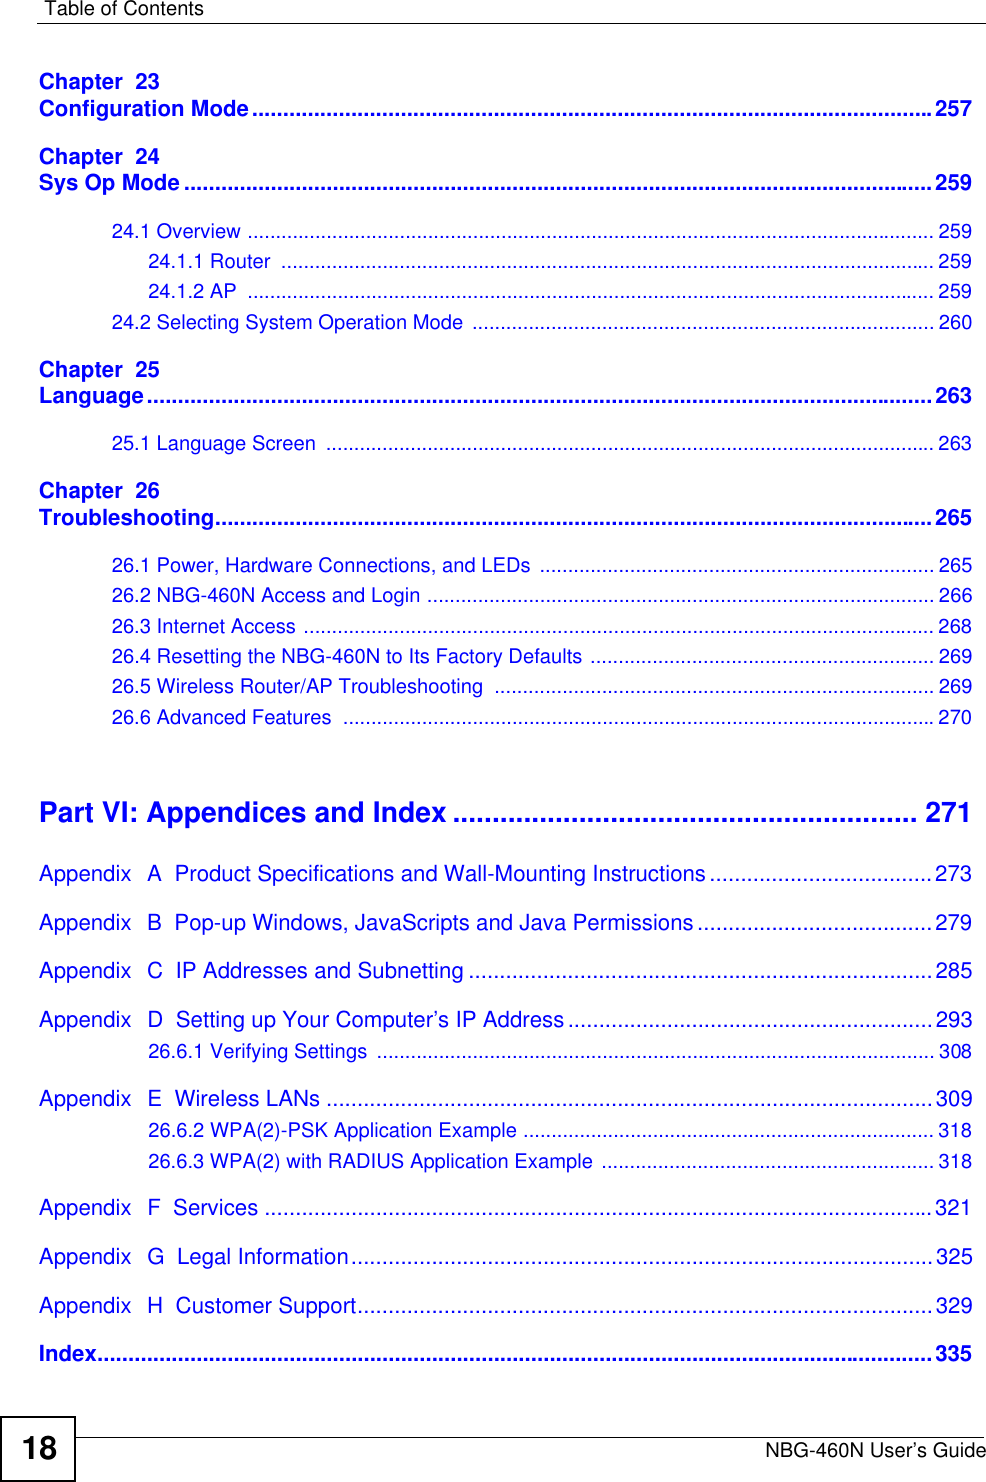 Table of ContentsNBG-460N User’s Guide18Chapter  23Configuration Mode..............................................................................................................257Chapter  24Sys Op Mode .........................................................................................................................25924.1 Overview .......................................................................................................................... 25924.1.1 Router  .................................................................................................................... 25924.1.2 AP  .......................................................................................................................... 25924.2 Selecting System Operation Mode  .................................................................................. 260Chapter  25Language...............................................................................................................................26325.1 Language Screen  ............................................................................................................ 263Chapter  26Troubleshooting....................................................................................................................26526.1 Power, Hardware Connections, and LEDs  ...................................................................... 26526.2 NBG-460N Access and Login .......................................................................................... 26626.3 Internet Access ................................................................................................................ 26826.4 Resetting the NBG-460N to Its Factory Defaults ............................................................. 26926.5 Wireless Router/AP Troubleshooting  .............................................................................. 26926.6 Advanced Features  .........................................................................................................270Part VI: Appendices and Index ........................................................... 271Appendix  A  Product Specifications and Wall-Mounting Instructions....................................273Appendix  B  Pop-up Windows, JavaScripts and Java Permissions......................................279Appendix  C  IP Addresses and Subnetting ...........................................................................285Appendix  D  Setting up Your Computer’s IP Address ...........................................................29326.6.1 Verifying Settings  ................................................................................................... 308Appendix  E  Wireless LANs ..................................................................................................30926.6.2 WPA(2)-PSK Application Example ......................................................................... 31826.6.3 WPA(2) with RADIUS Application Example ........................................................... 318Appendix  F  Services ............................................................................................................321Appendix  G  Legal Information..............................................................................................325Appendix  H  Customer Support.............................................................................................329Index.......................................................................................................................................335